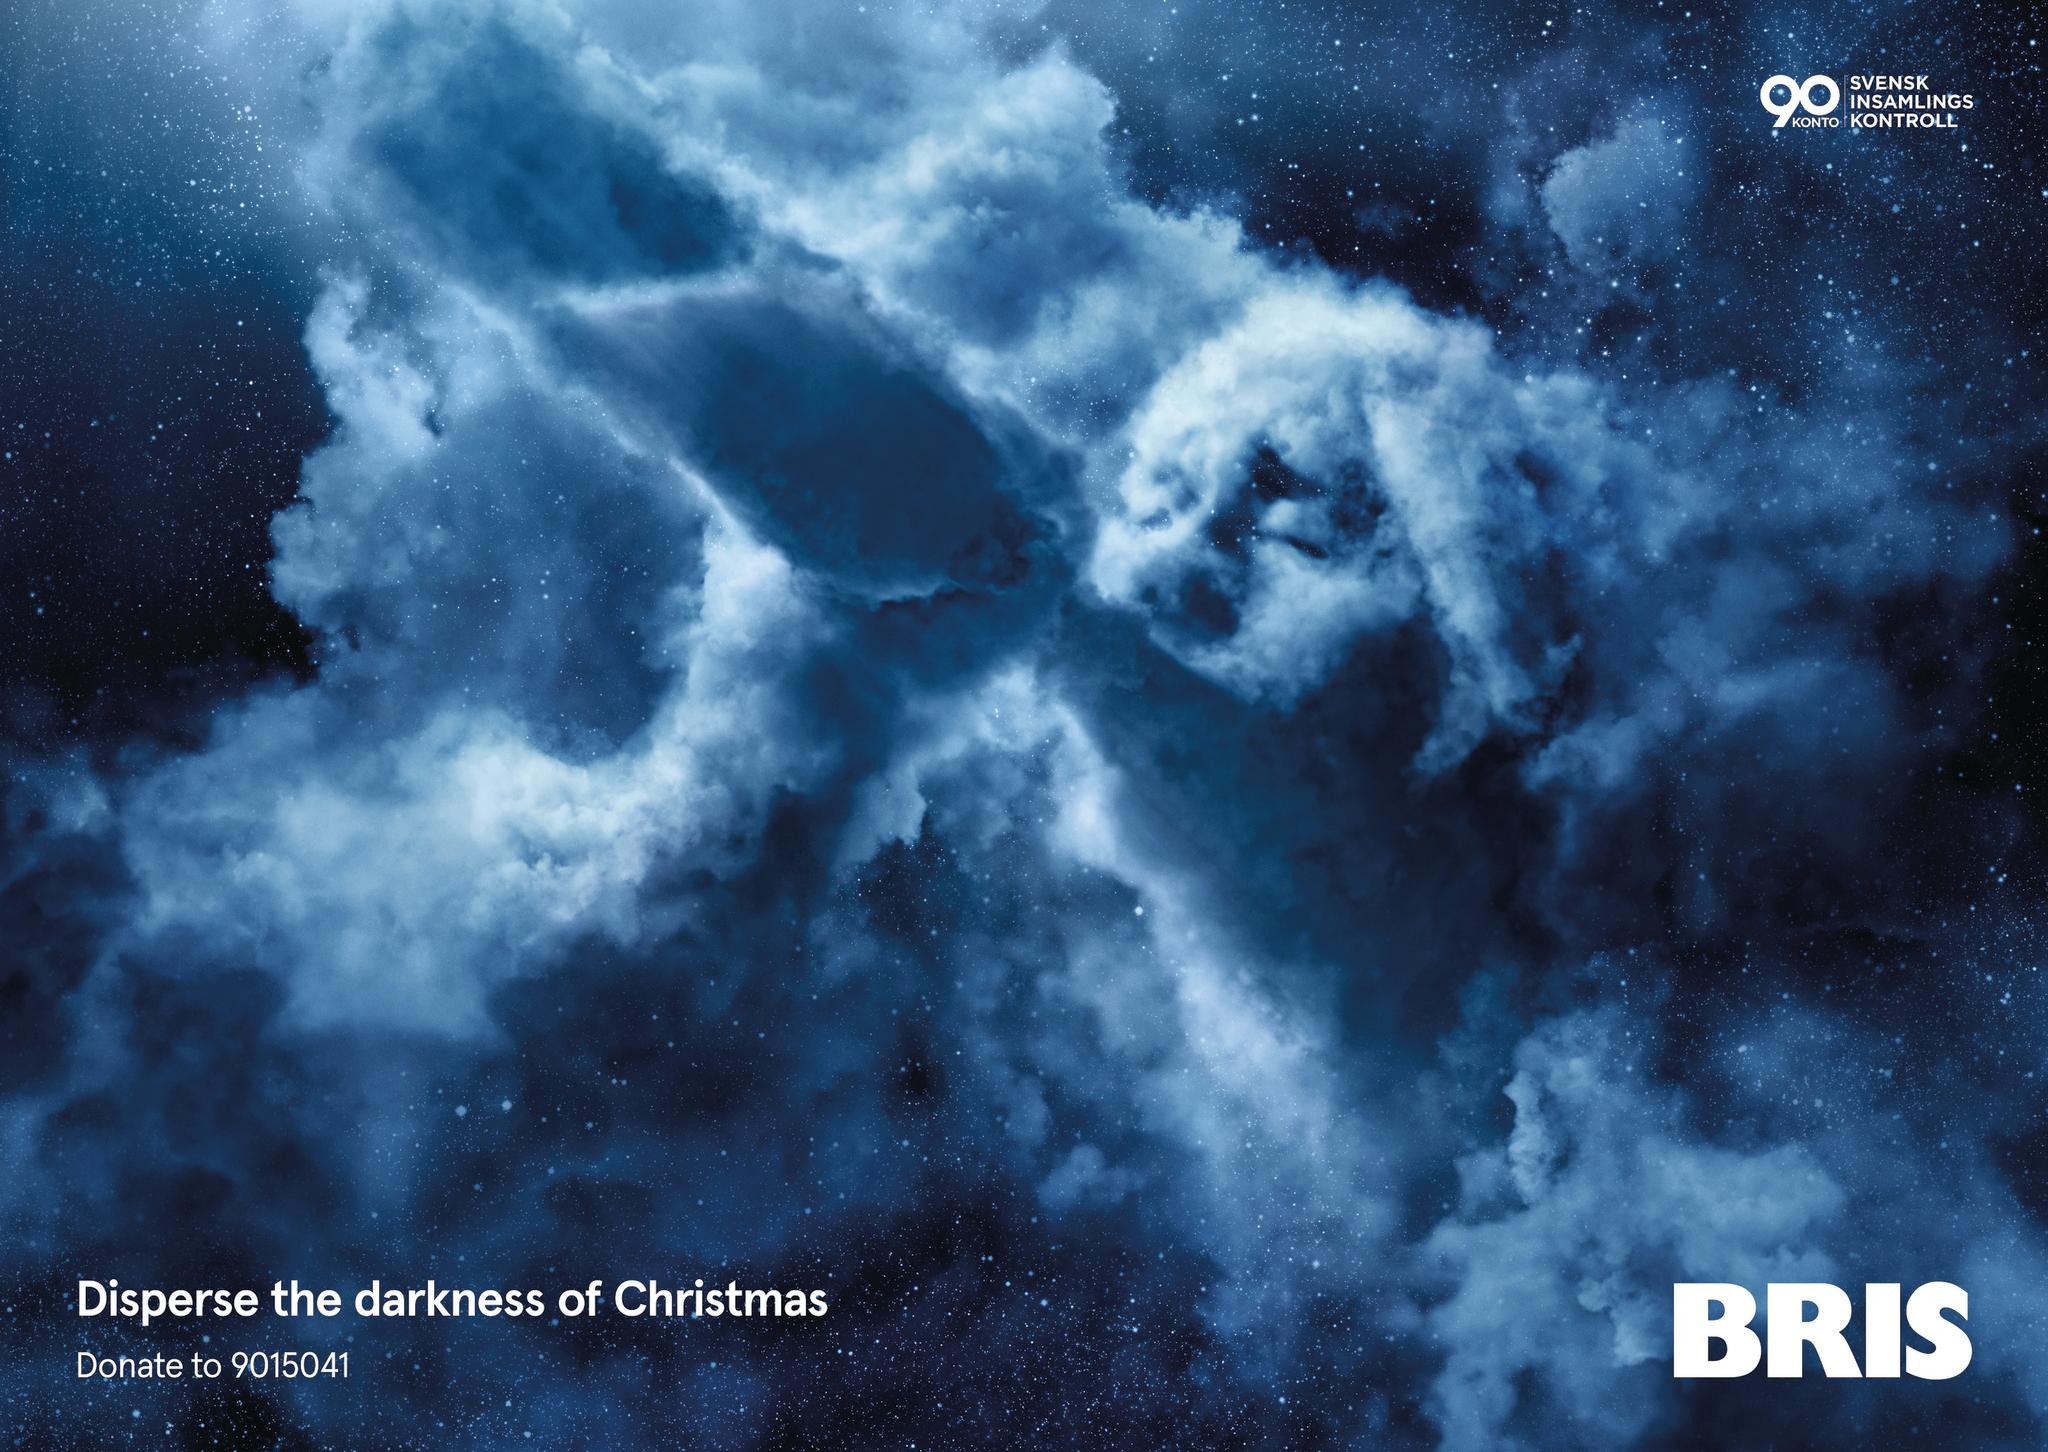 Disperce the darkness of Christmas